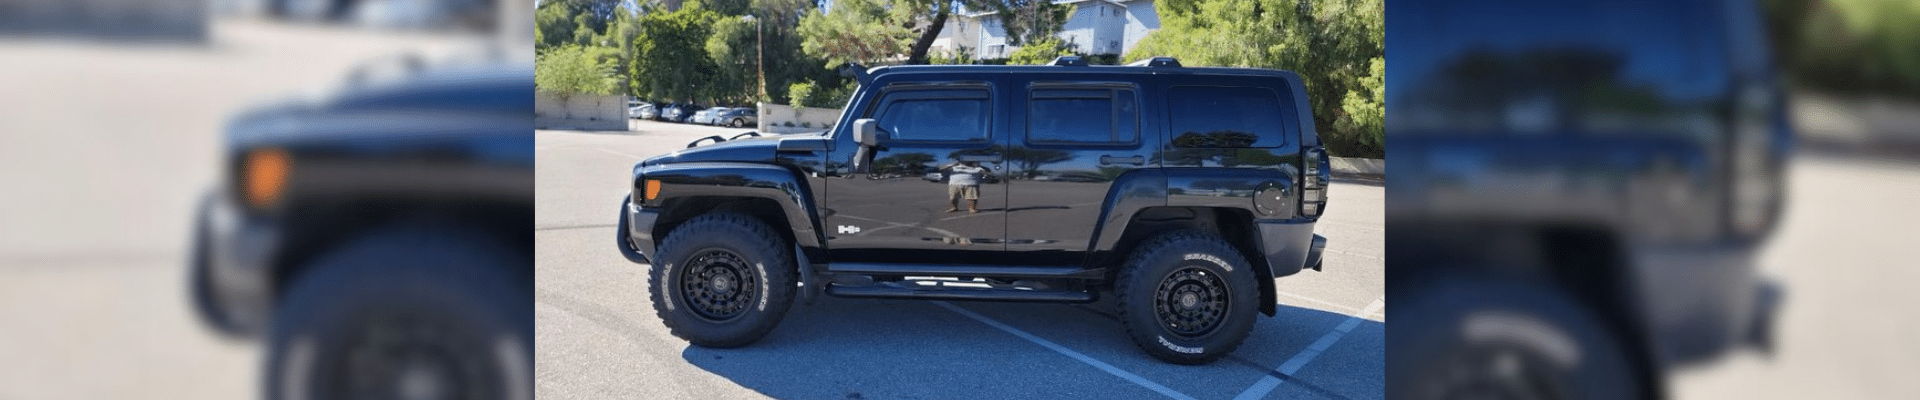 Hummer H3 gallery 2